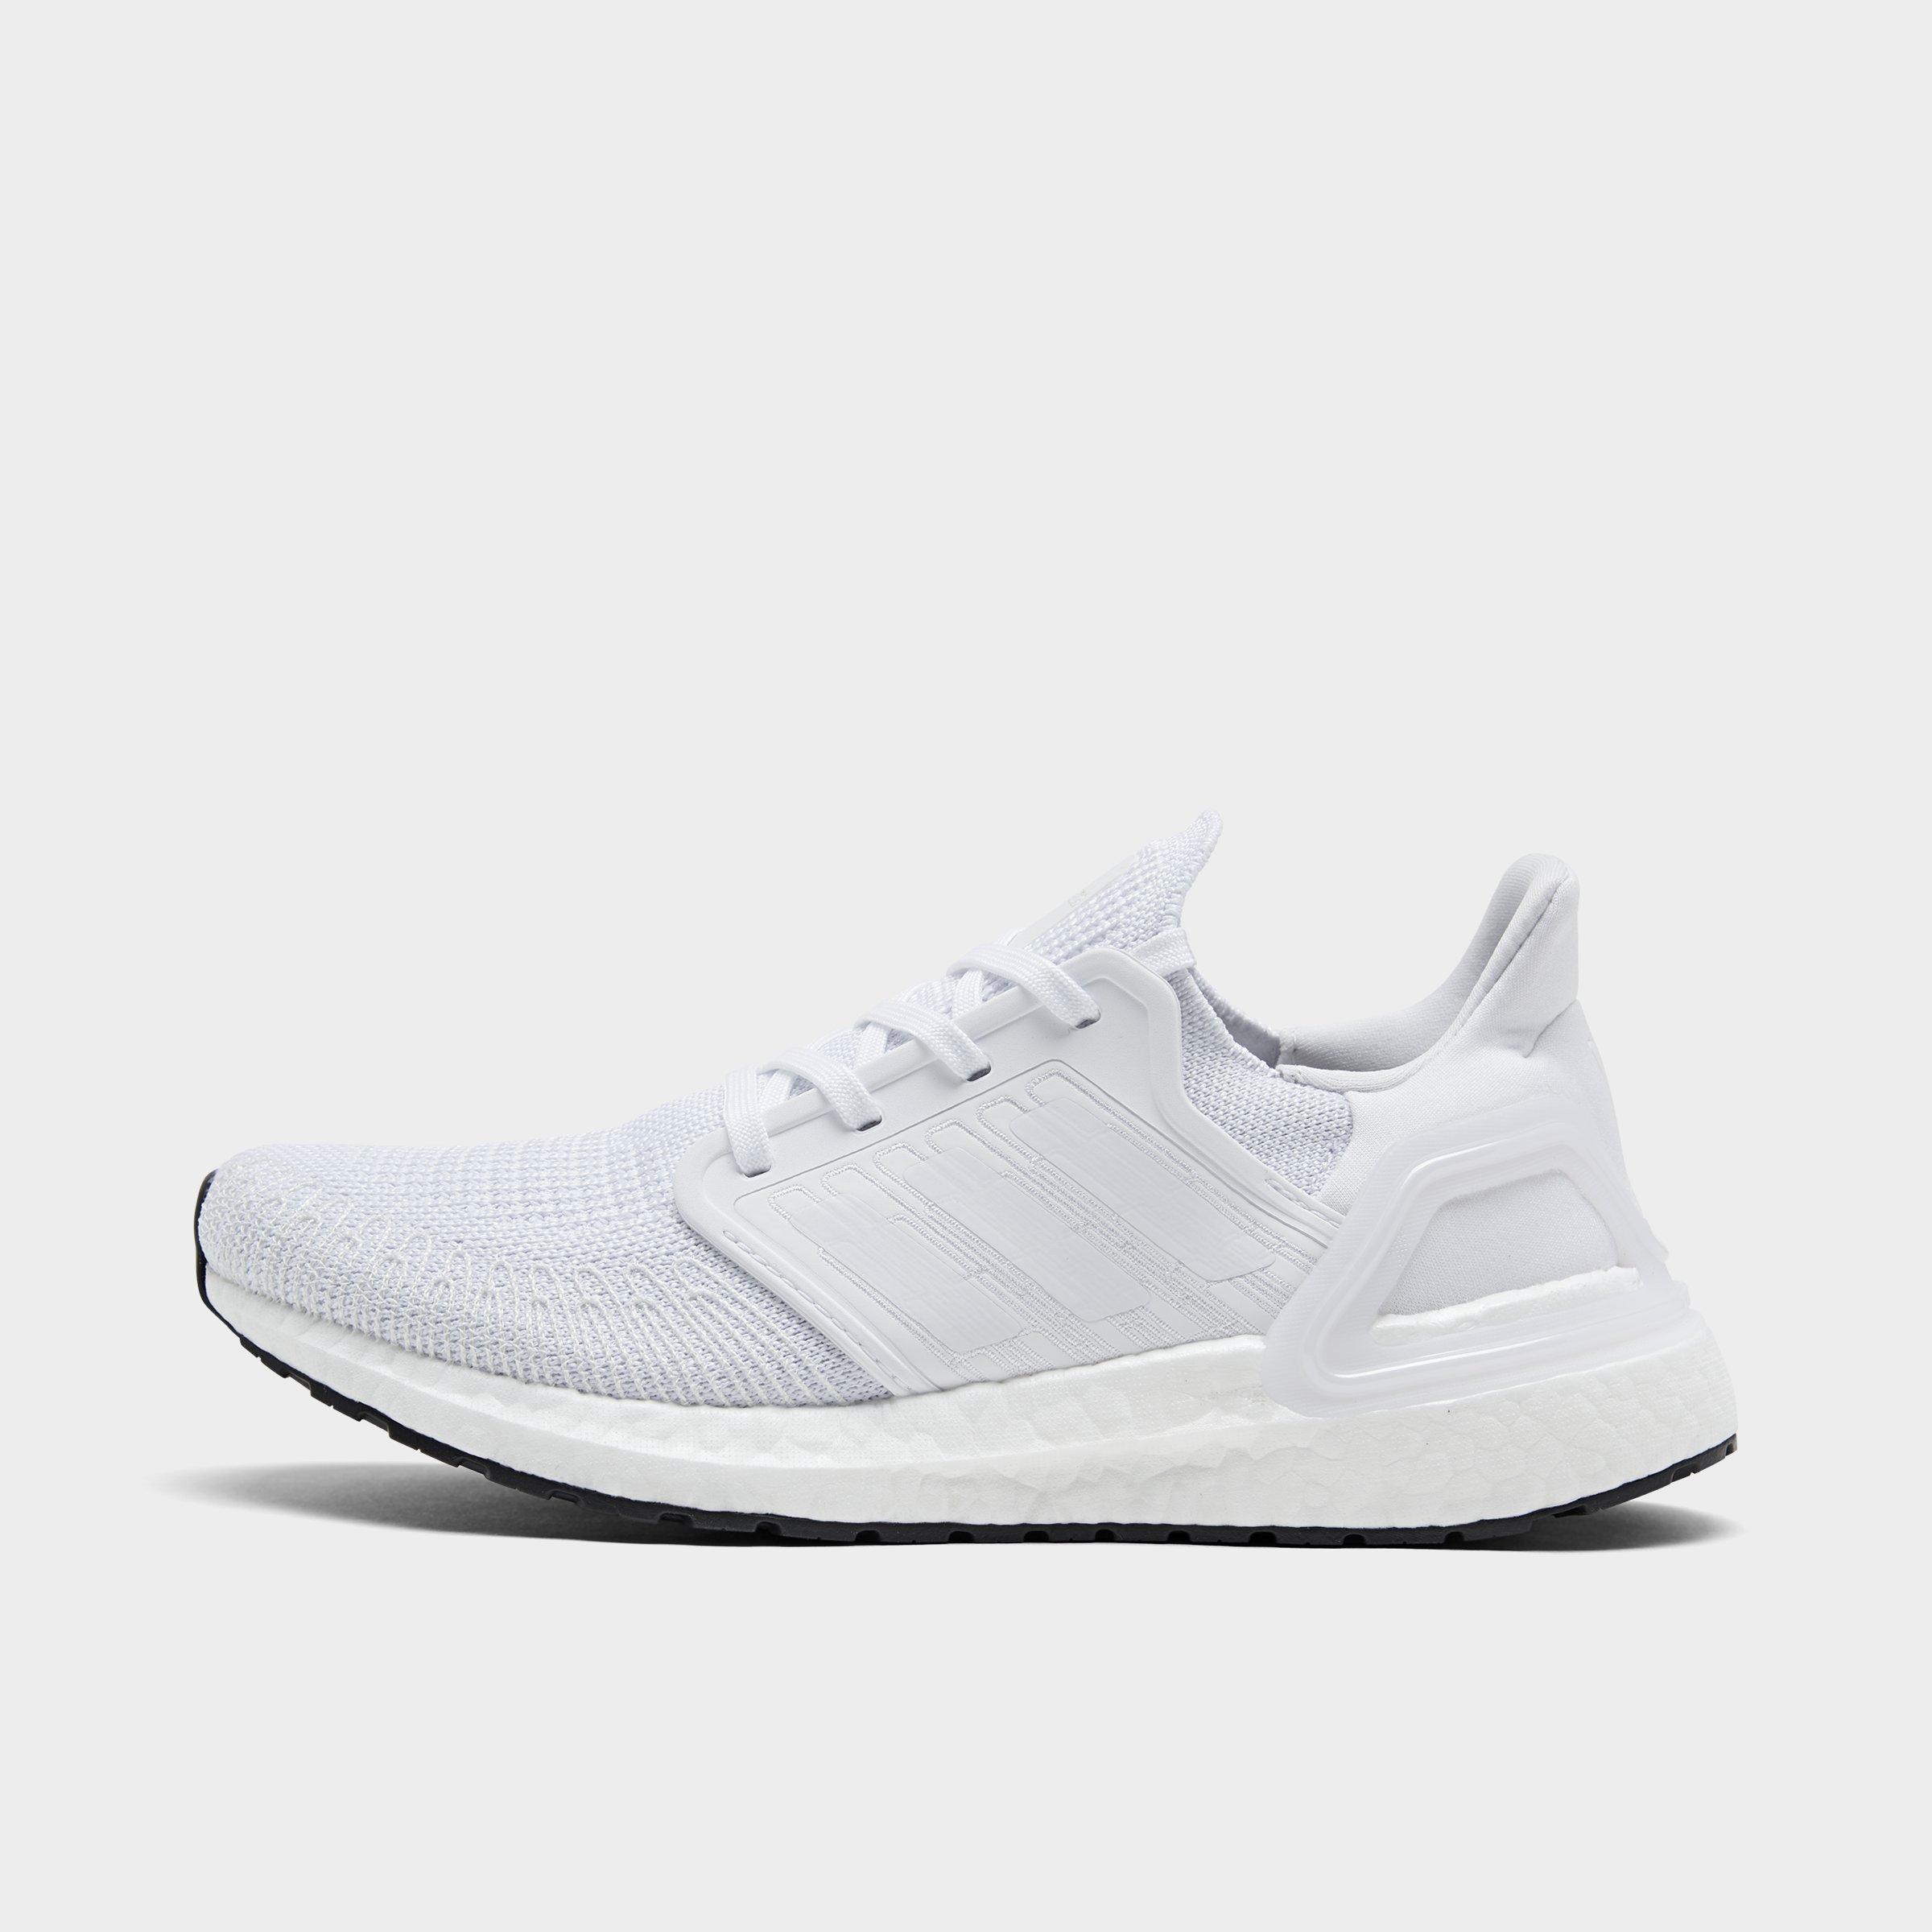 adidas all white ultra boost womens